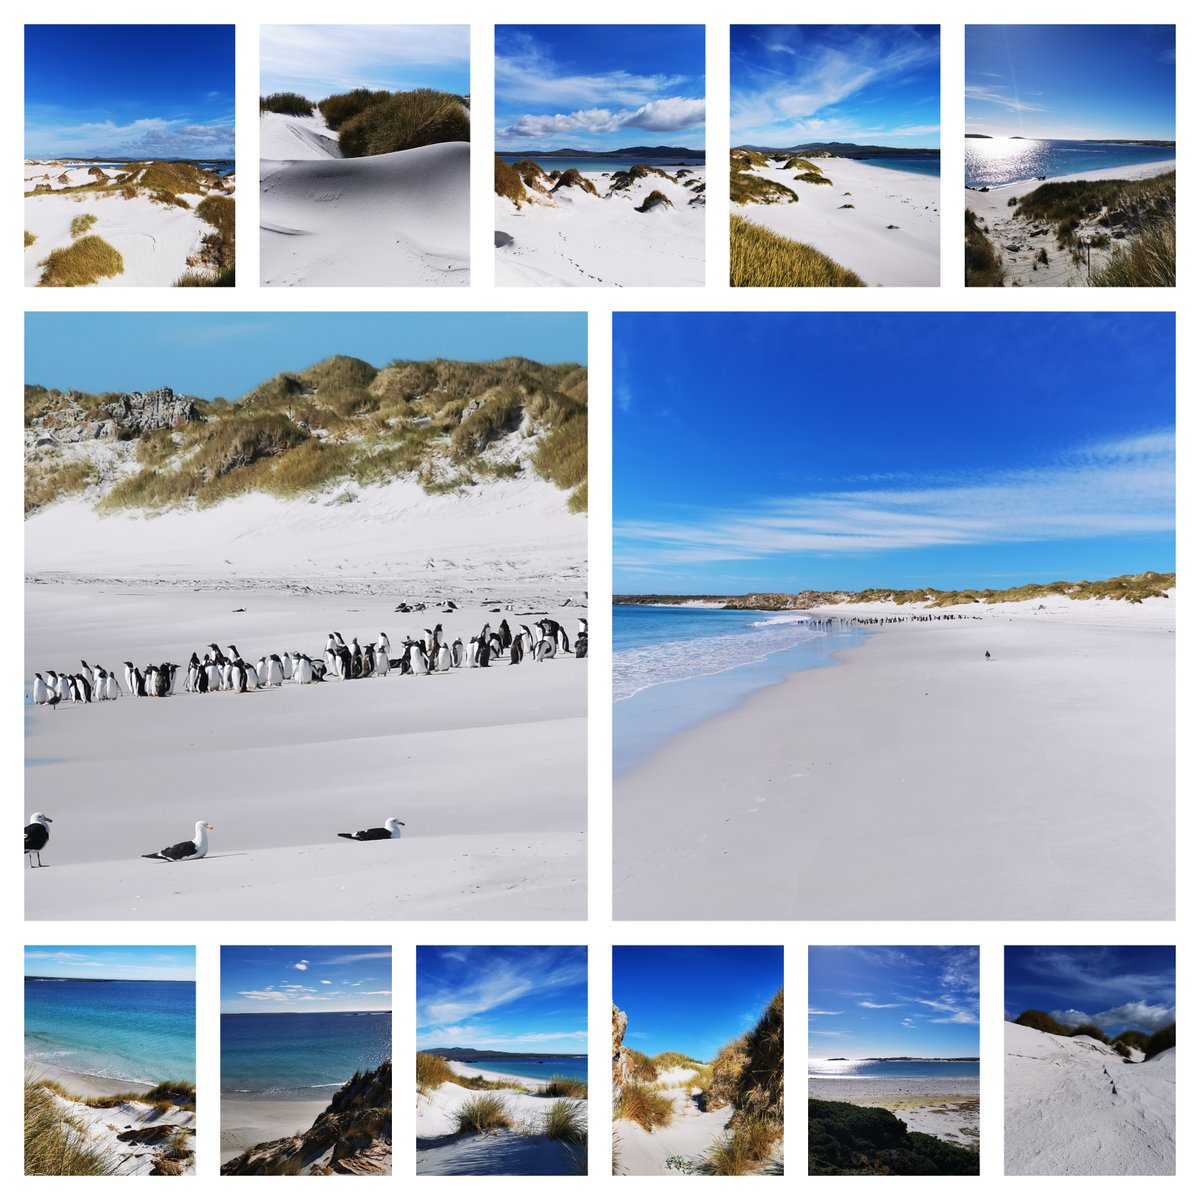 #falklandislands #yorkebay today is #Internationalmine #awarenessday November 2020 marked the month the #falklands became mine free after 38 years...approx 30.000 land mines were laid by the invading Argentine troops in 1982...146 mine fields were cleared...pics before & after...